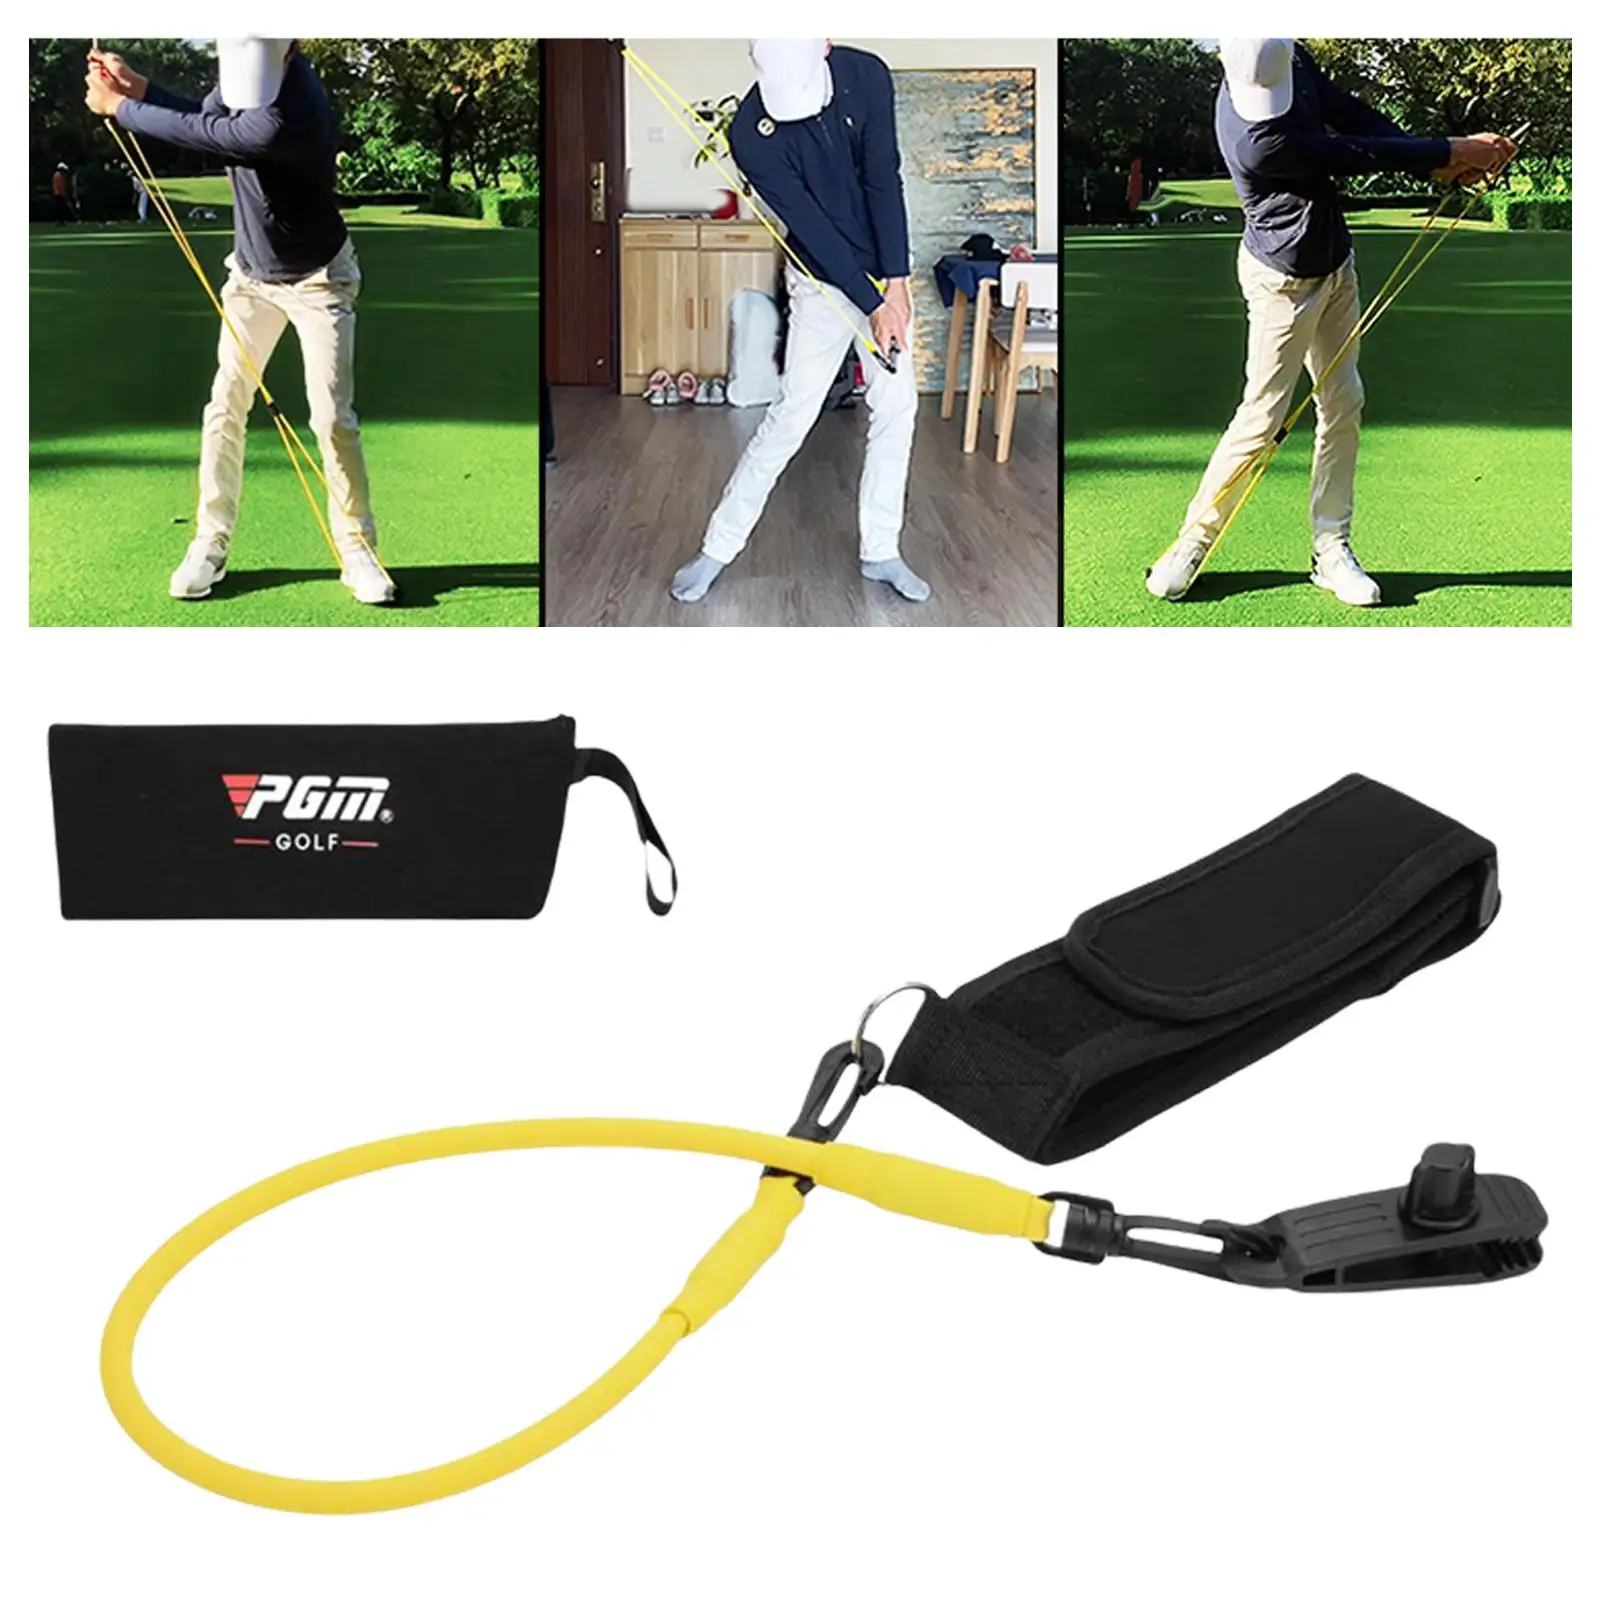 

Golf Swing Trainer, Arm Belt, Posture Motion Gesture Alignment Training Correcting Teaching Supplies for Golfers